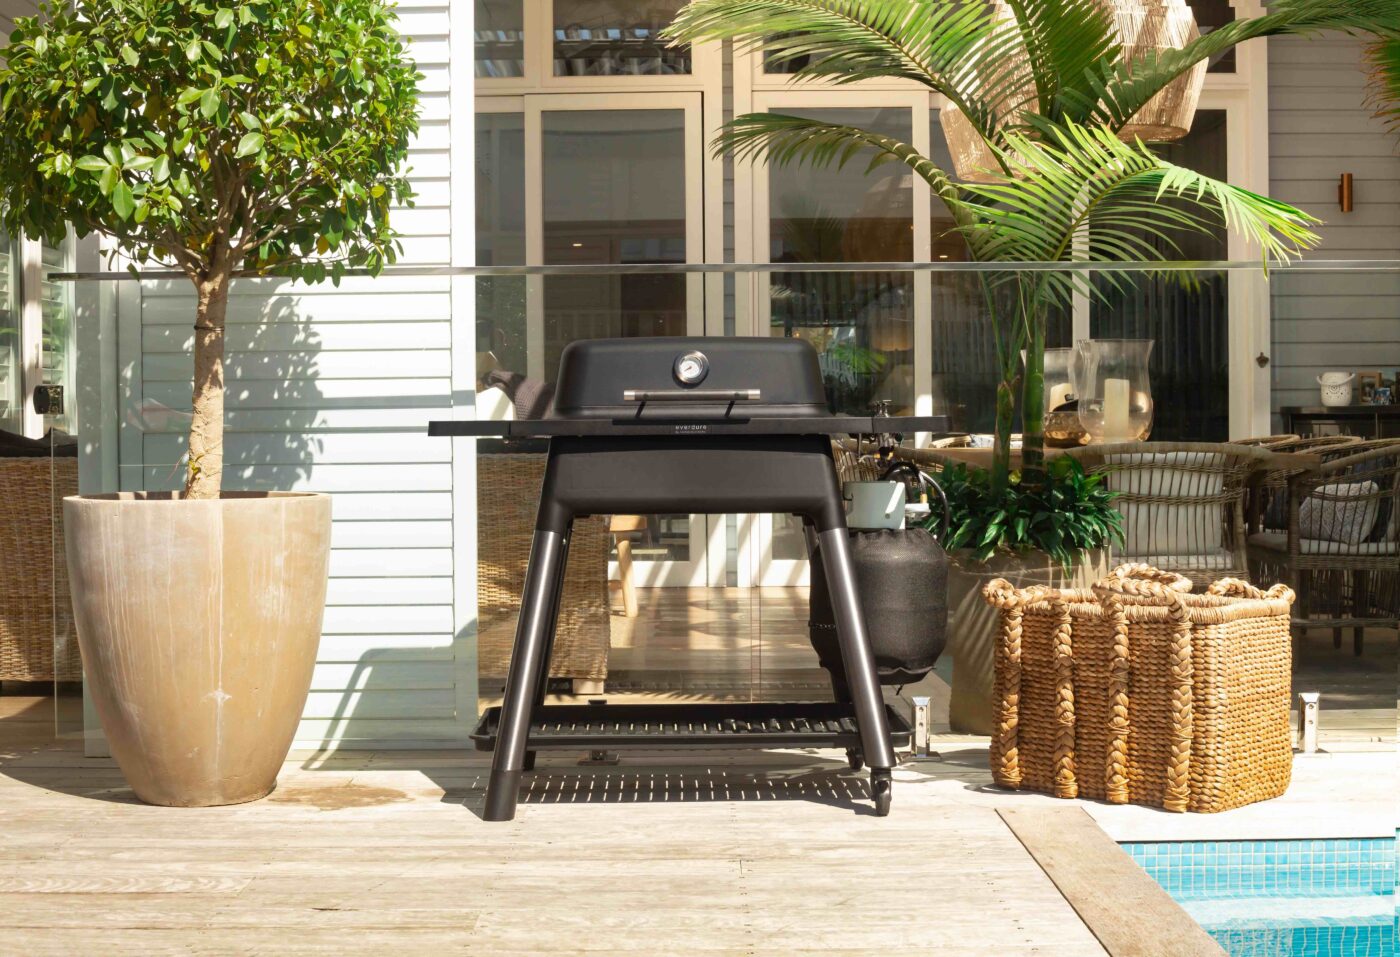 Everdure’s New BBQ Range Is A Force To Be Reckoned With This Australian ...